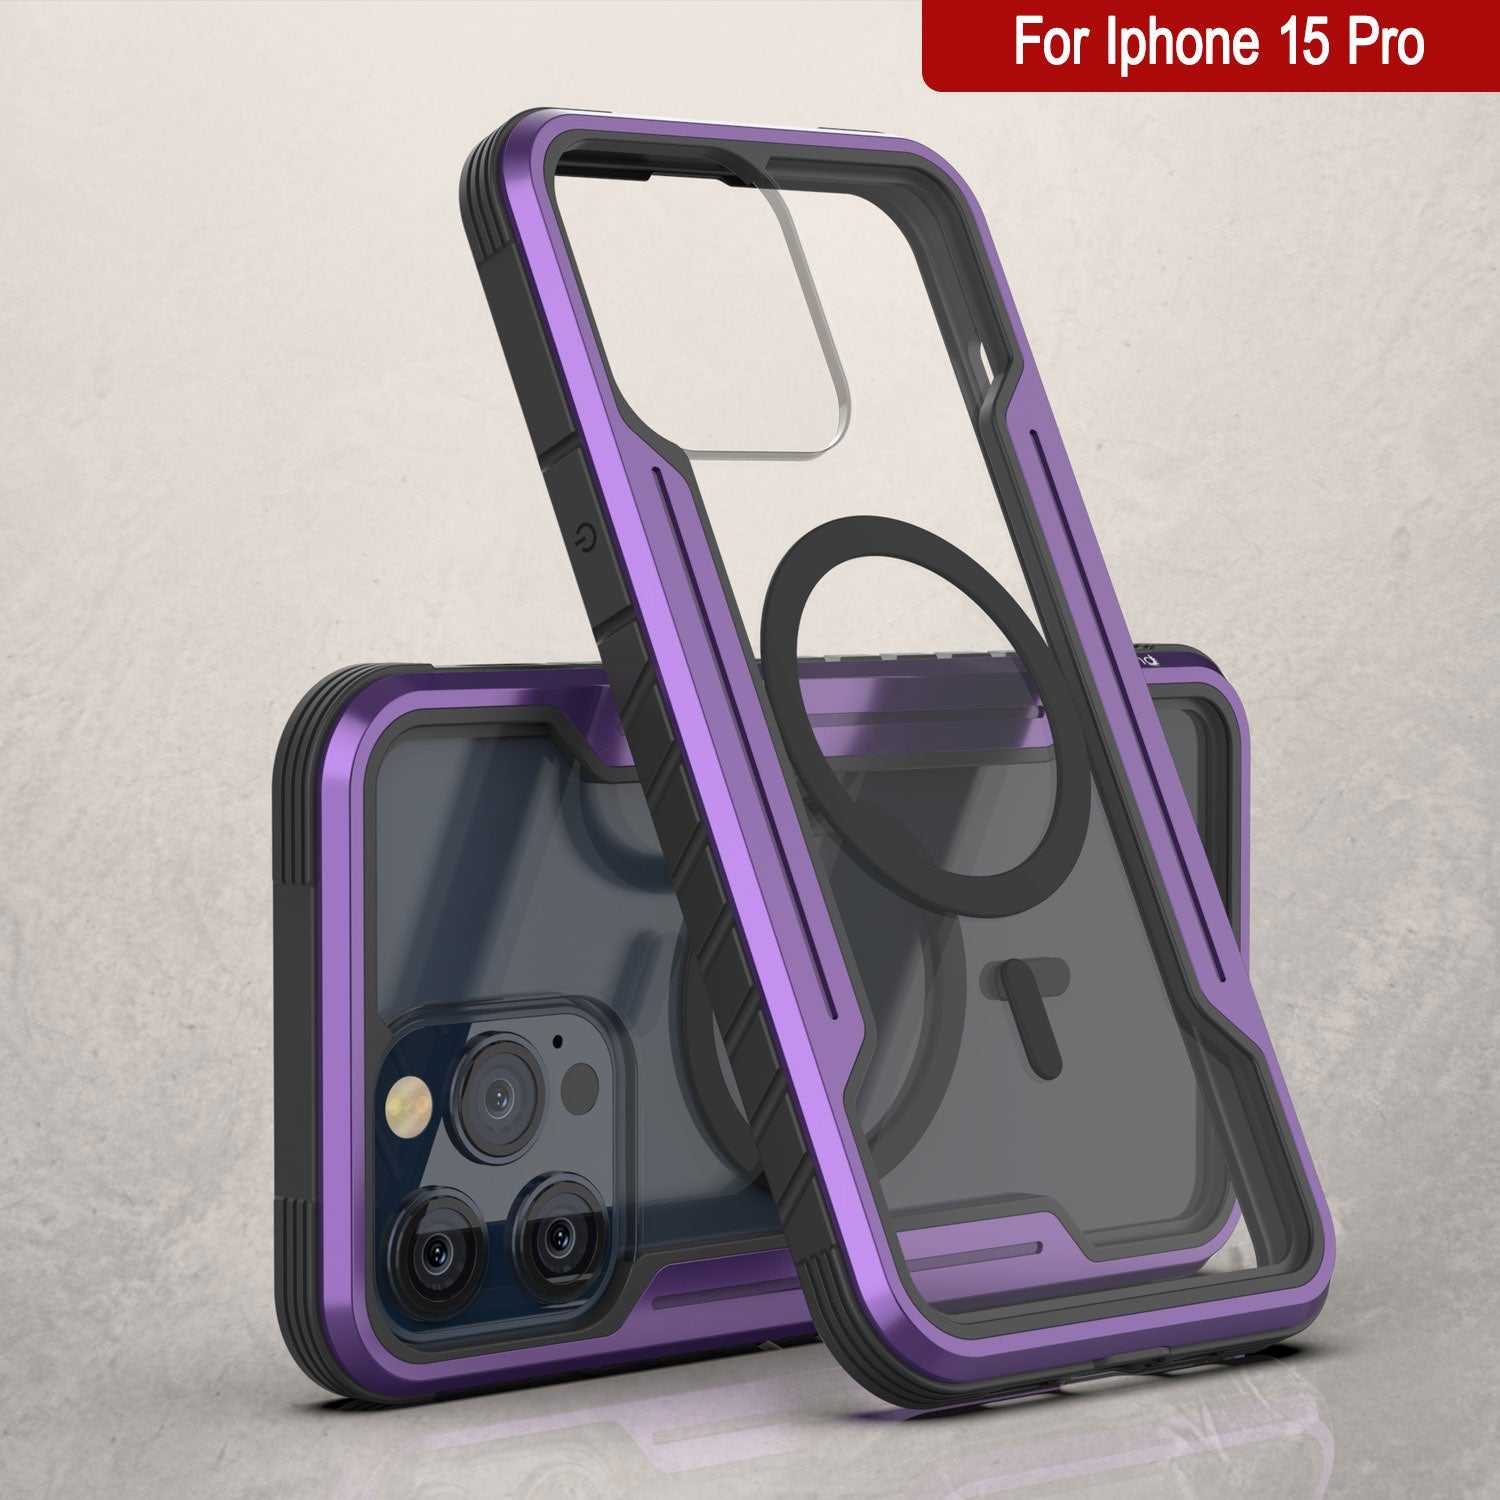 Punkcase iPhone 15 Pro Armor Stealth MAG Defense Case Protective Military Grade Multilayer Cover [Purple]